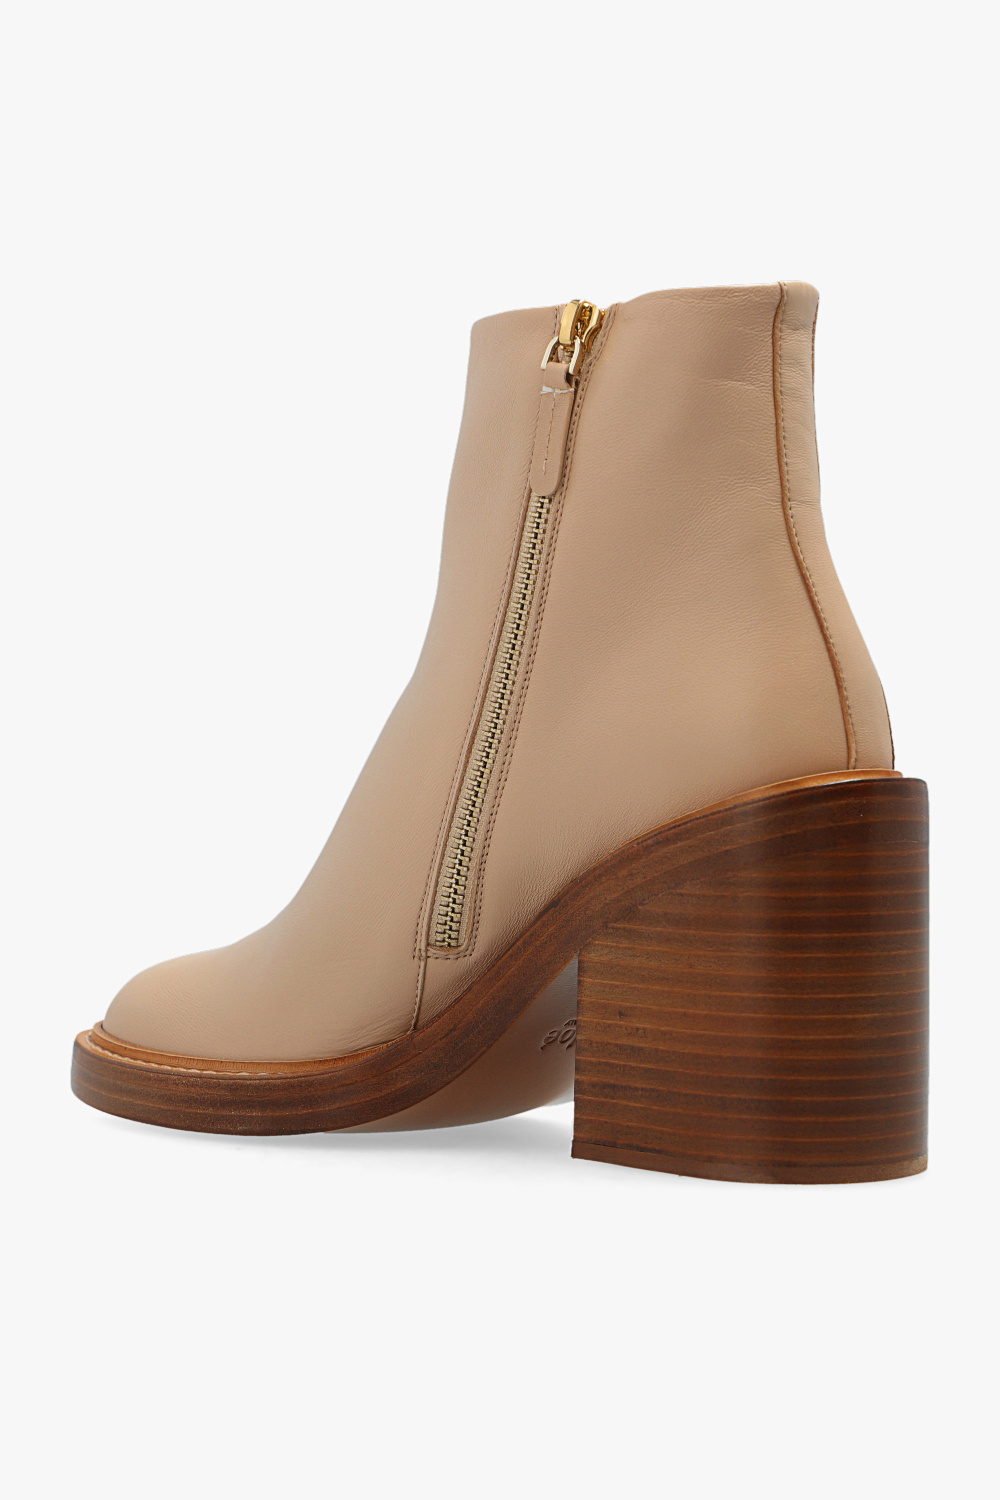 Chloé ‘May’ heeled ankle boots